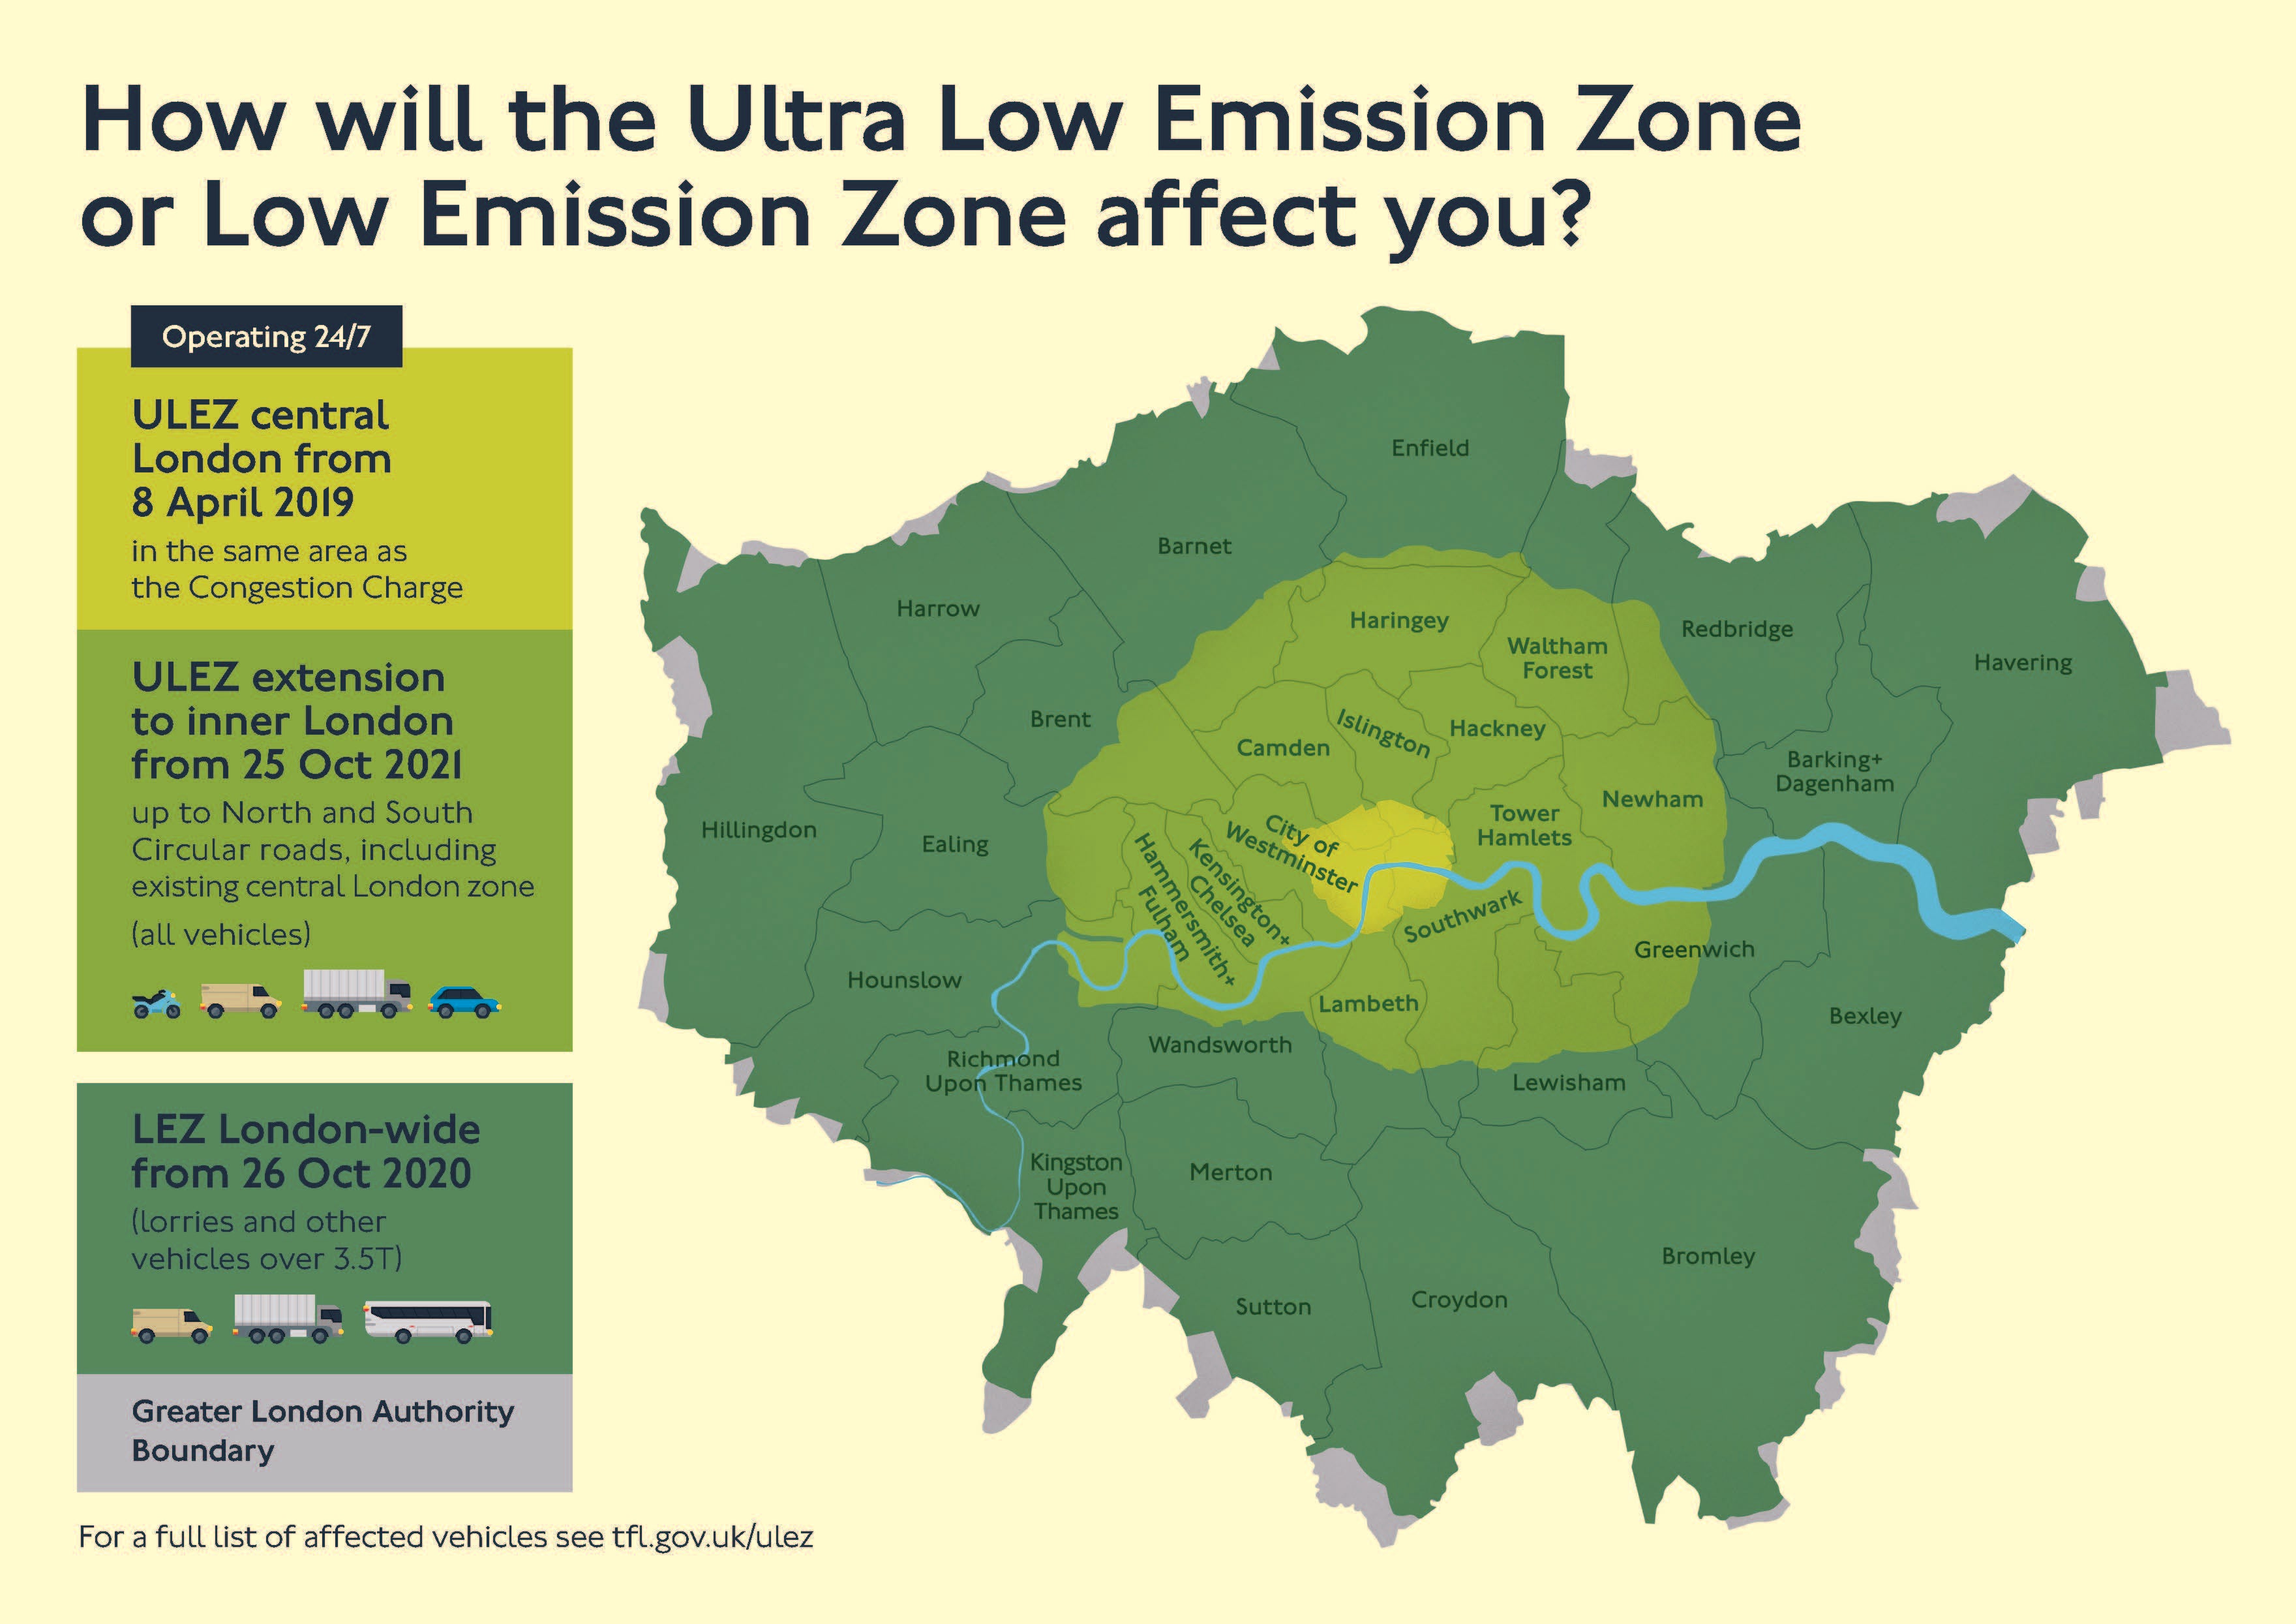 ULEZ - Ultra Low Emissions Zone - Everything Motorcycles and Scooter Riders Need to Know